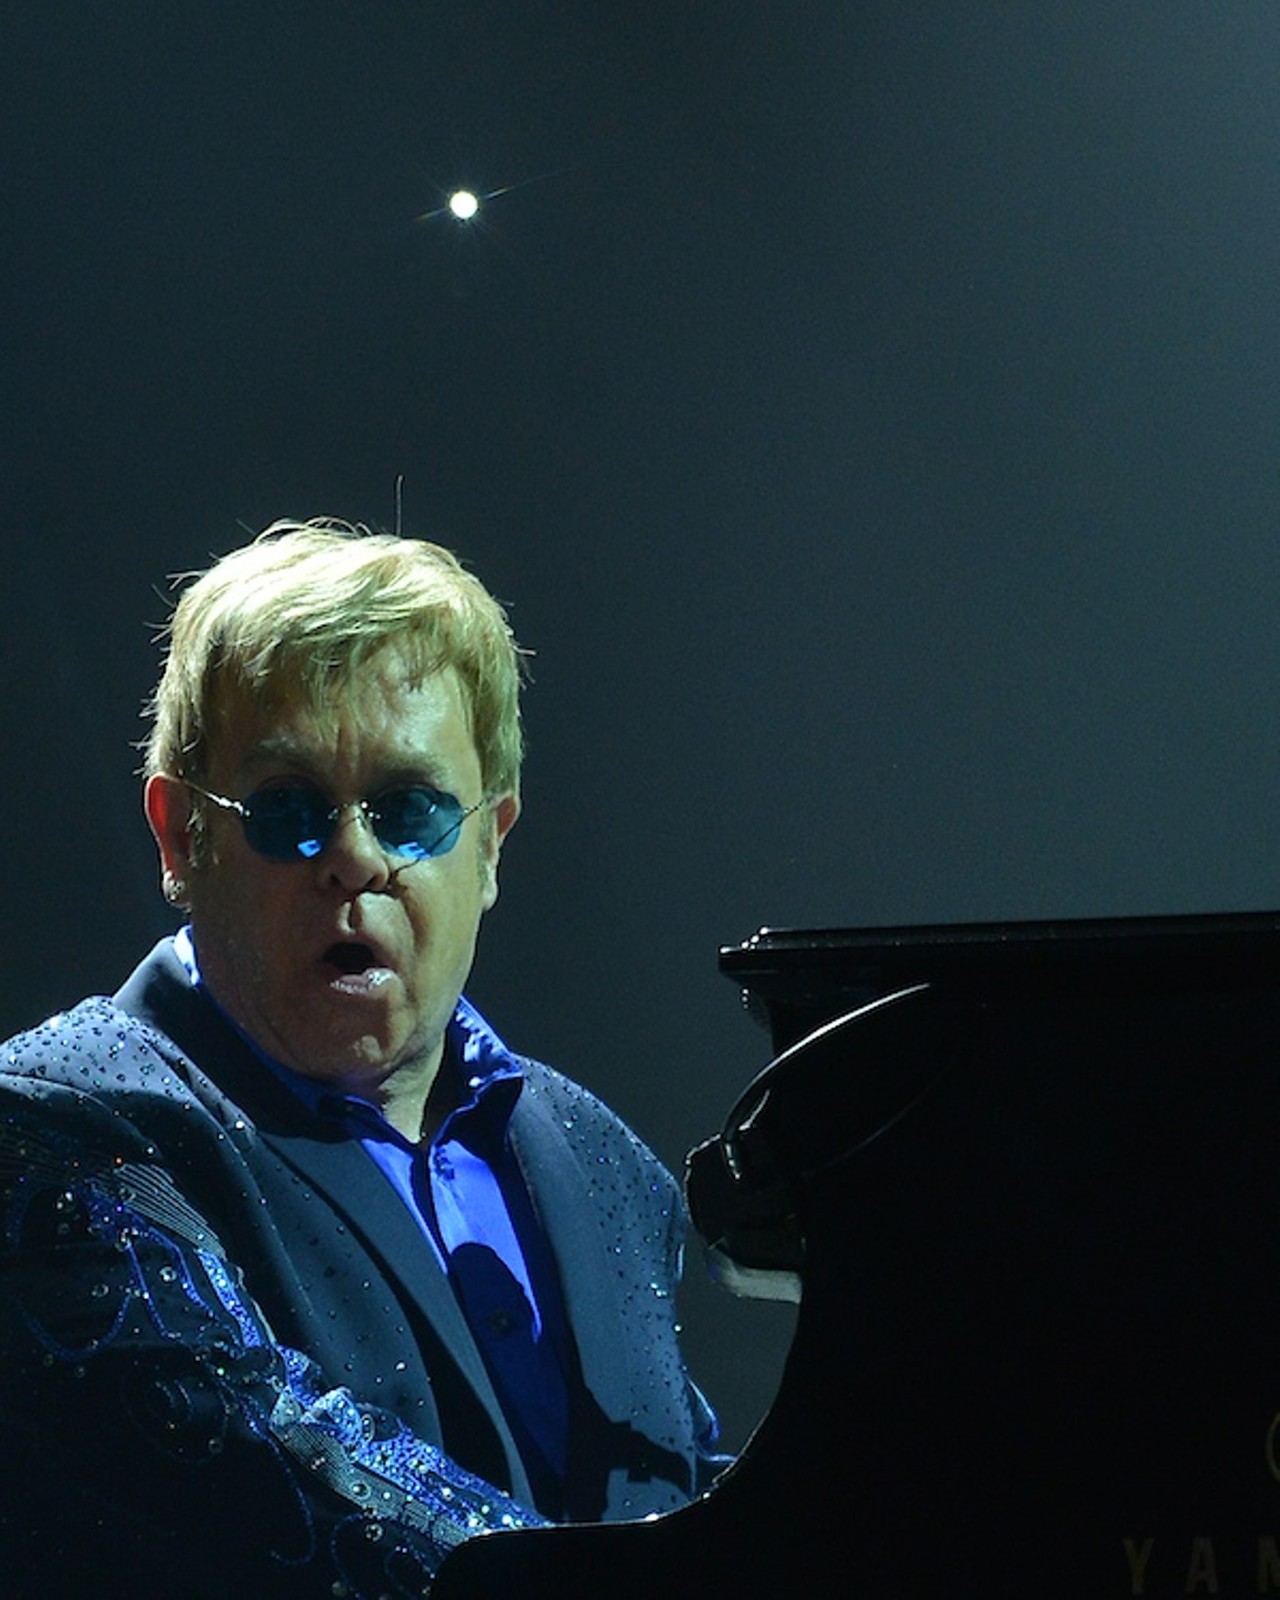 Elton John performing last night at the Covelli Center in Youngstown